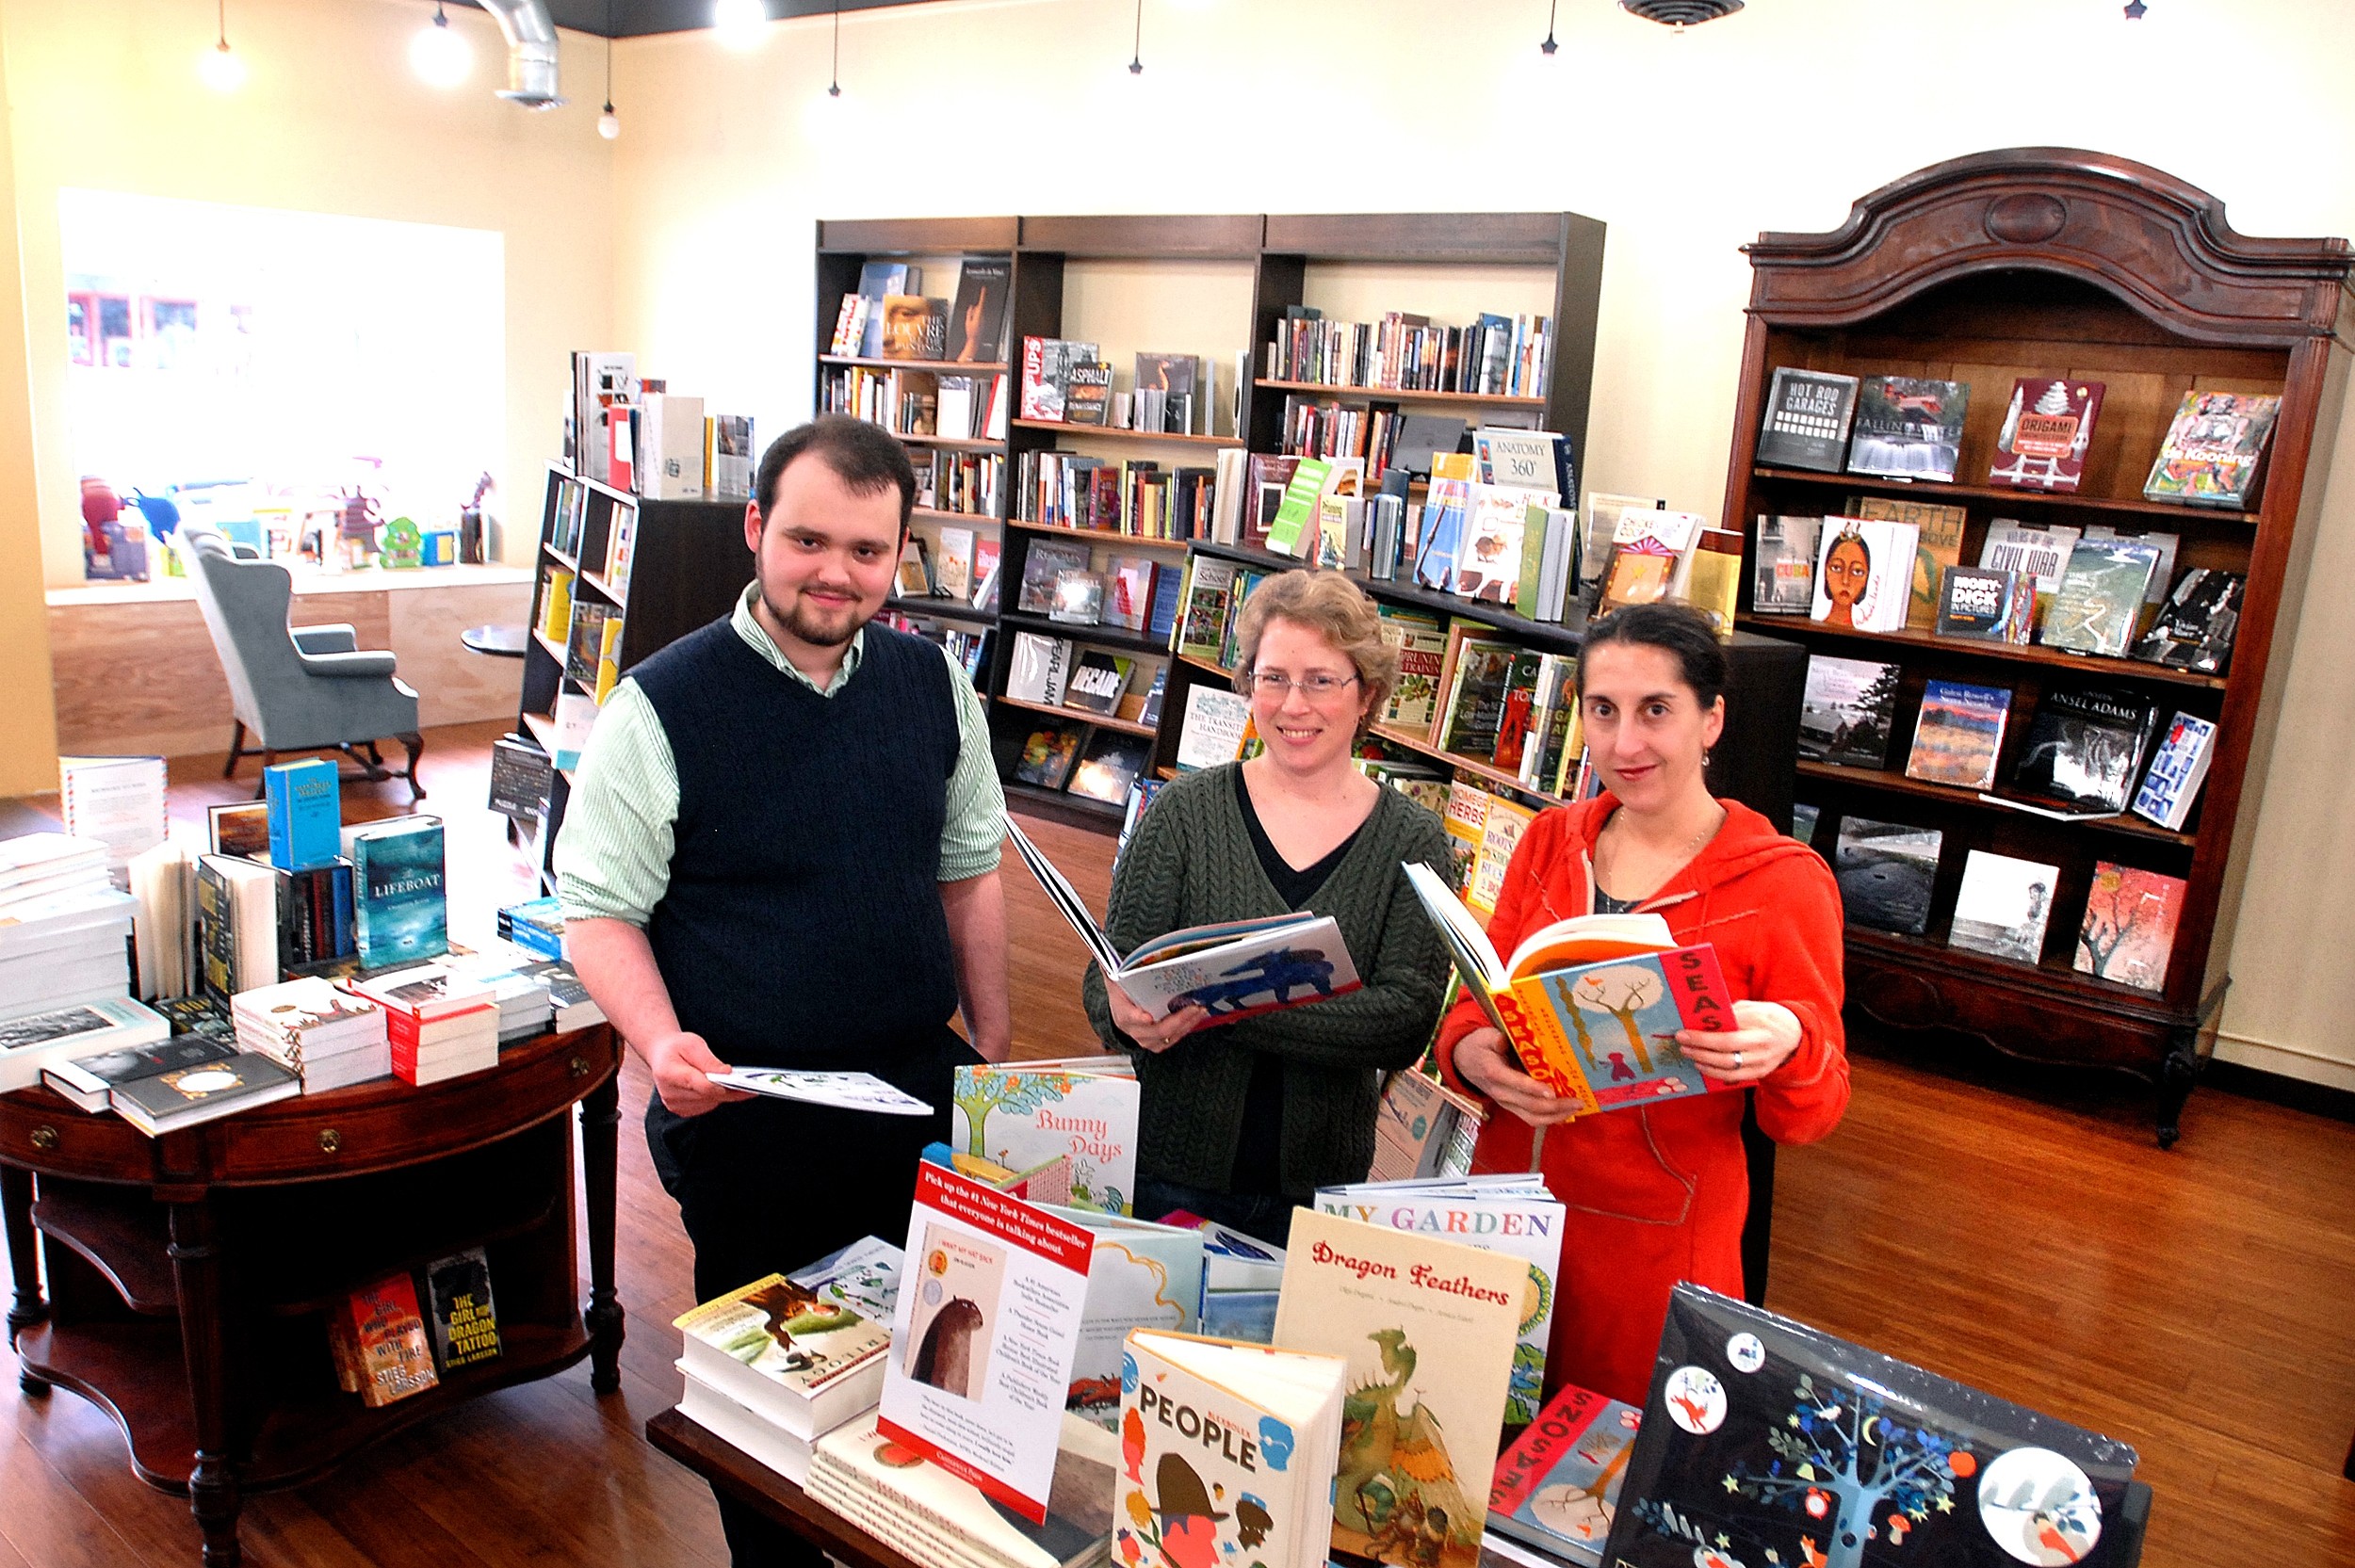 Nearly 20 authors signing Thursday at BookPeople's grand re-opening